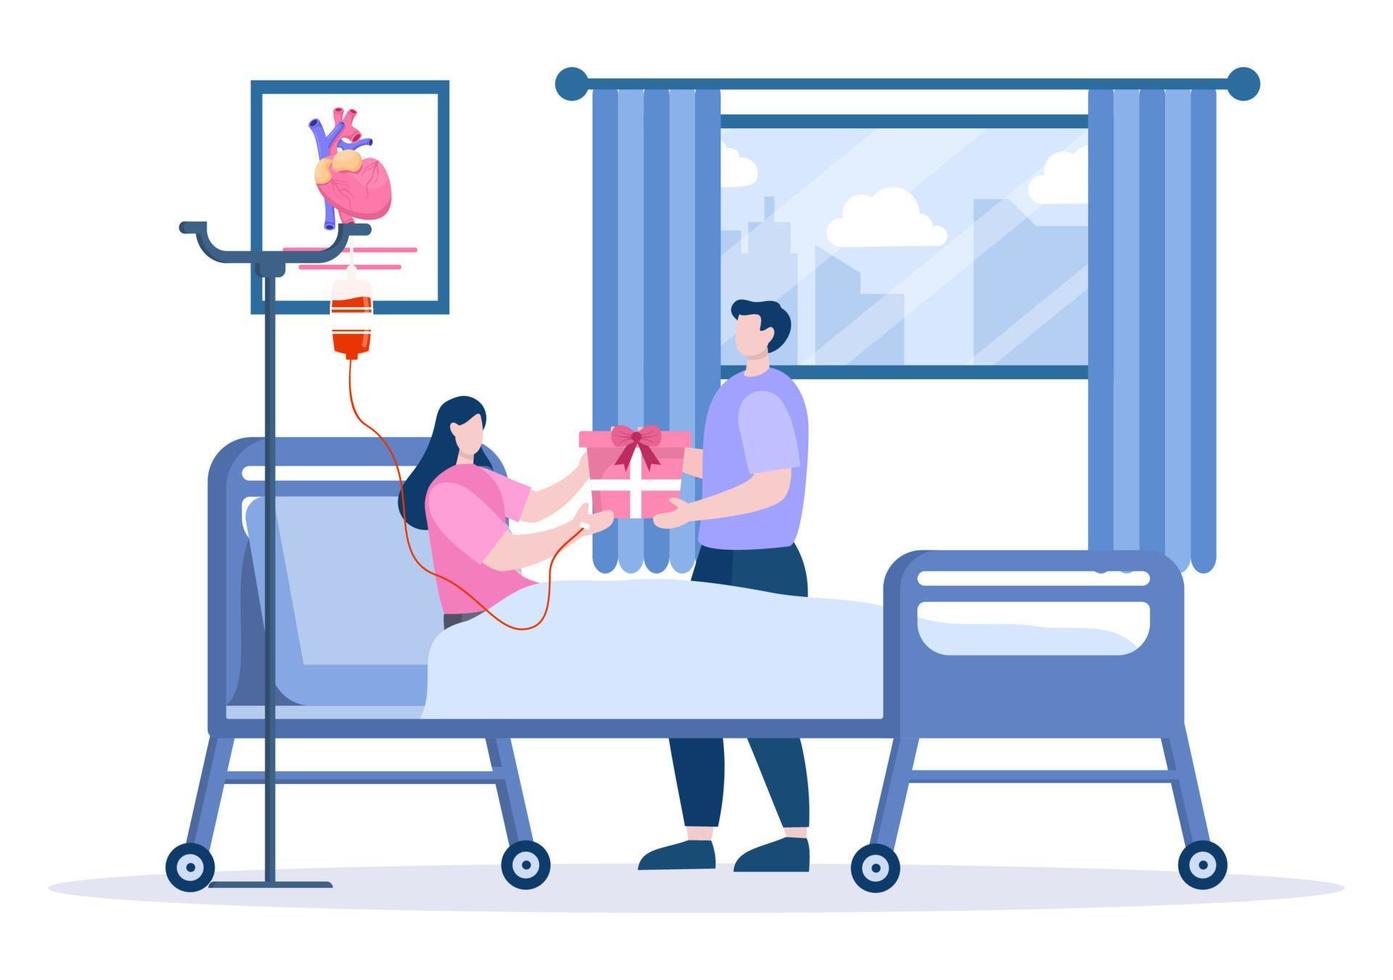 Gift Box Donation to Hospital Room Background Vector illustration. Man Giving gift for Female Patient